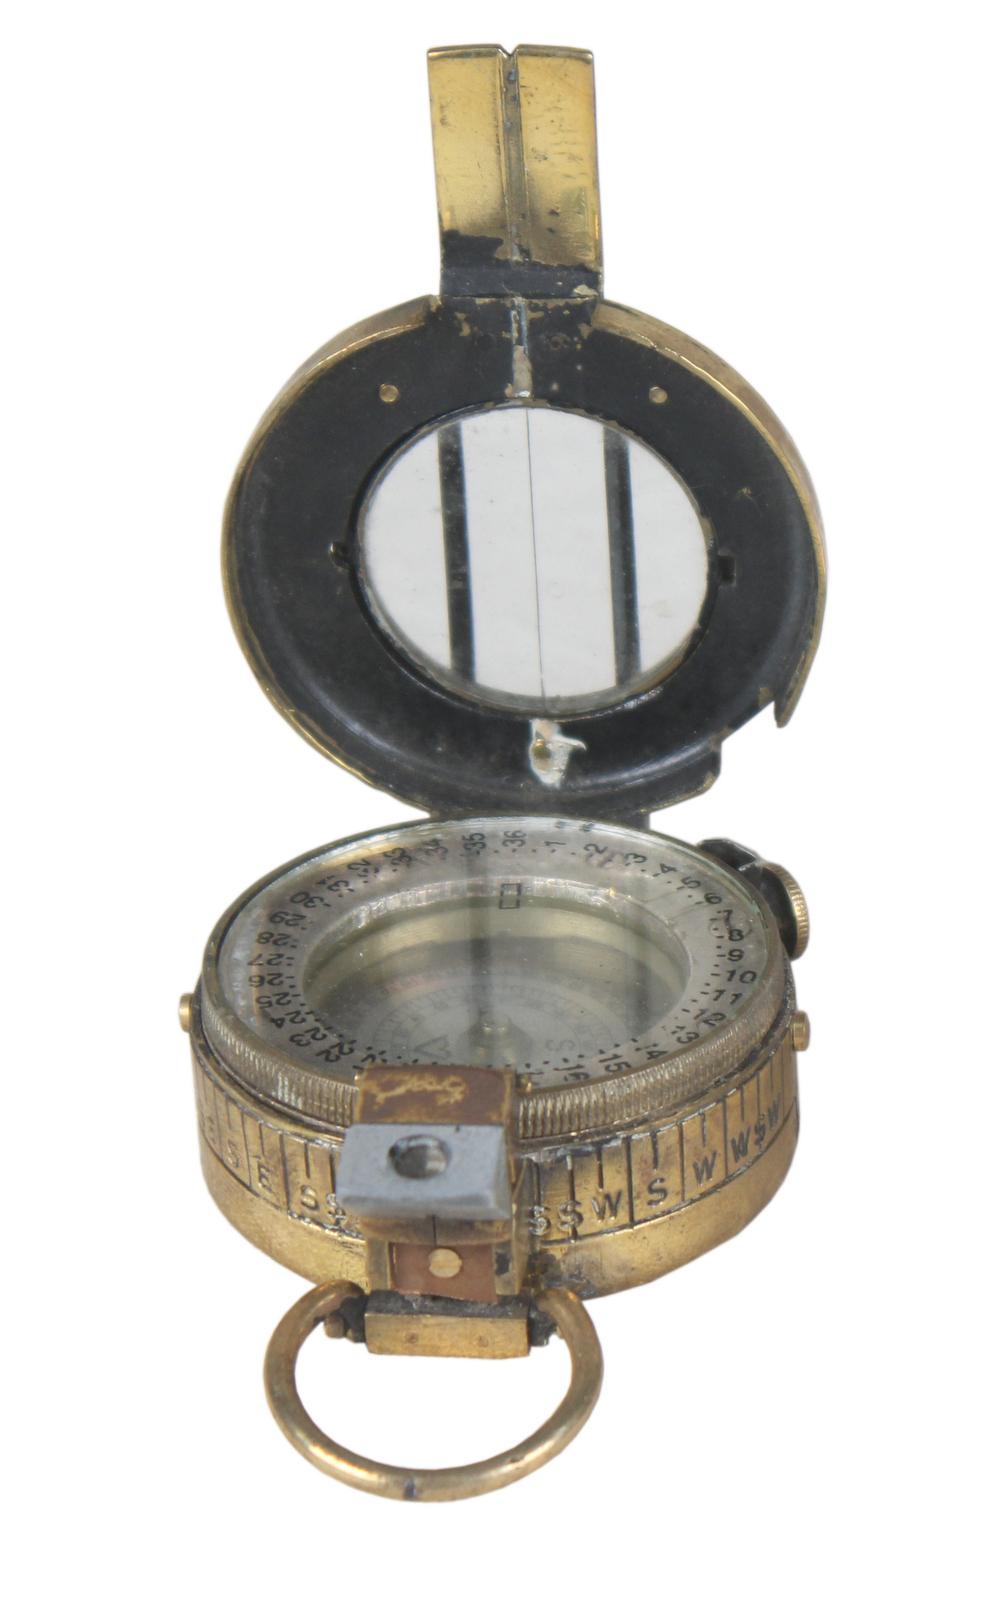 A working brass pocket compass marked London, 1942 on the back. Nickel dial. With hinged glass magnifier. WWII English. TG Co. Ltd.